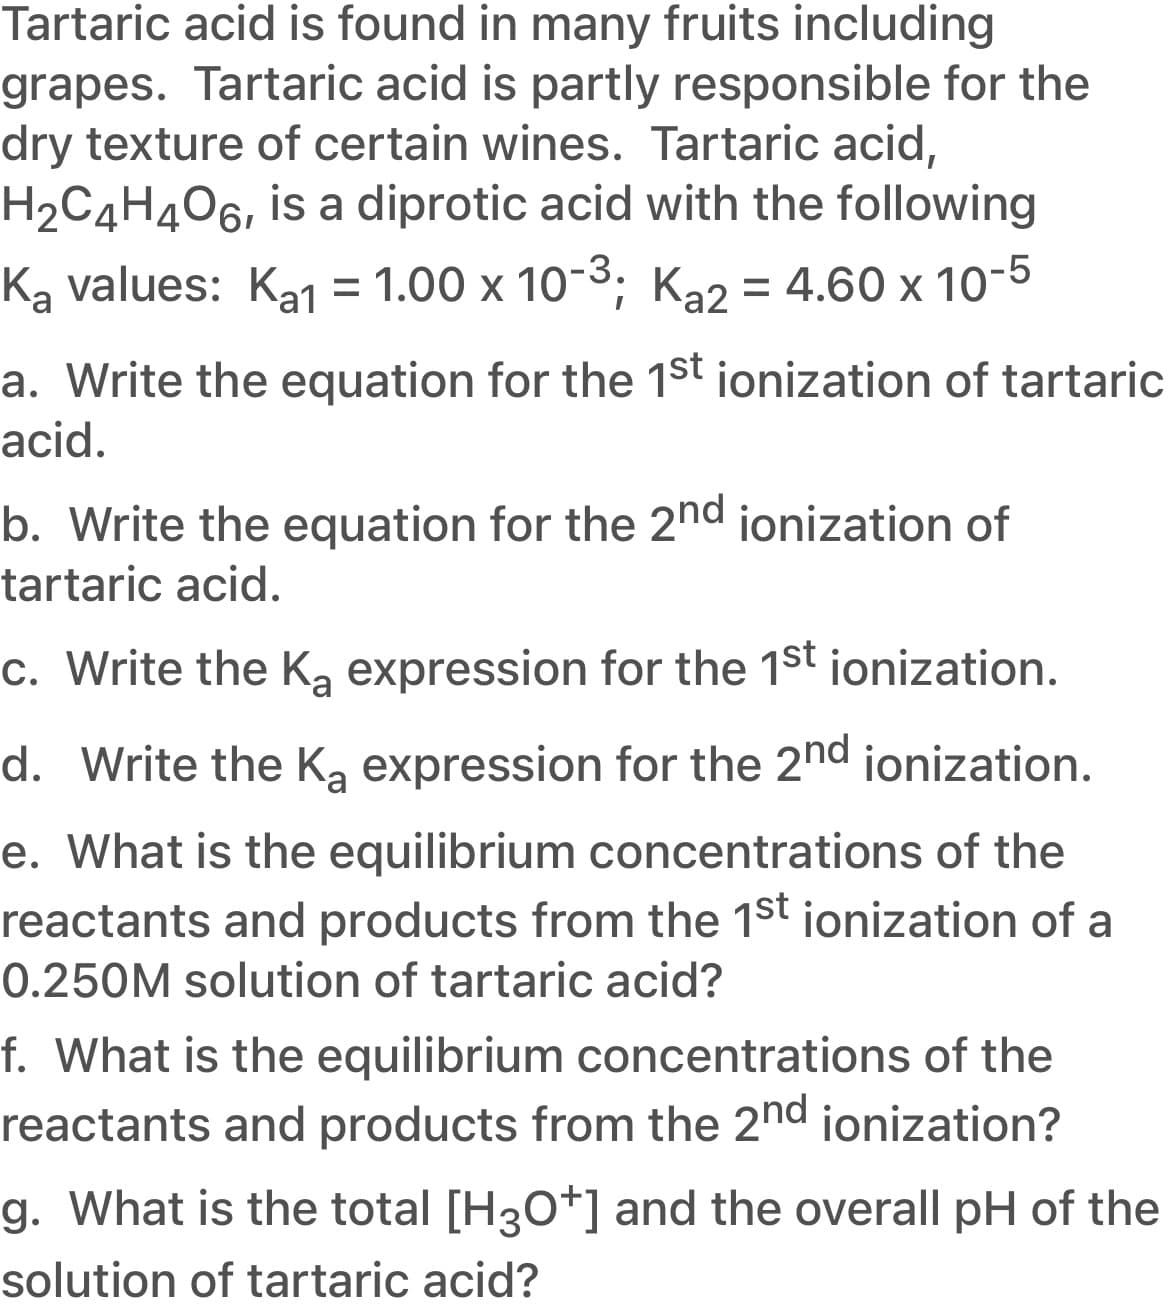 Tartaric acid is found in many fruits including
grapes. Tartaric acid is partly responsible for the
dry texture of certain wines. Tartaric acid,
H2C4H4O6, is a diprotic acid with the following
Ką values: Ka1
= 1.00 x 10-3; Ka2 = 4.60 x 10-5
a. Write the equation for the 1st jonization of tartaric
acid.
b. Write the equation for the 2nd ionization of
tartaric acid.
c. Write the Ką expression for the 1st ionization.
d. Write the Ką expression for the 2nd ionization.
e. What is the equilibrium concentrations of the
reactants and products from the 1st ionization of a
0.250M solution of tartaric acid?
f. What is the equilibrium concentrations of the
reactants and products from the 2nd ionization?
g. What is the total [H30+] and the overall pH of the
solution of tartaric acid?
